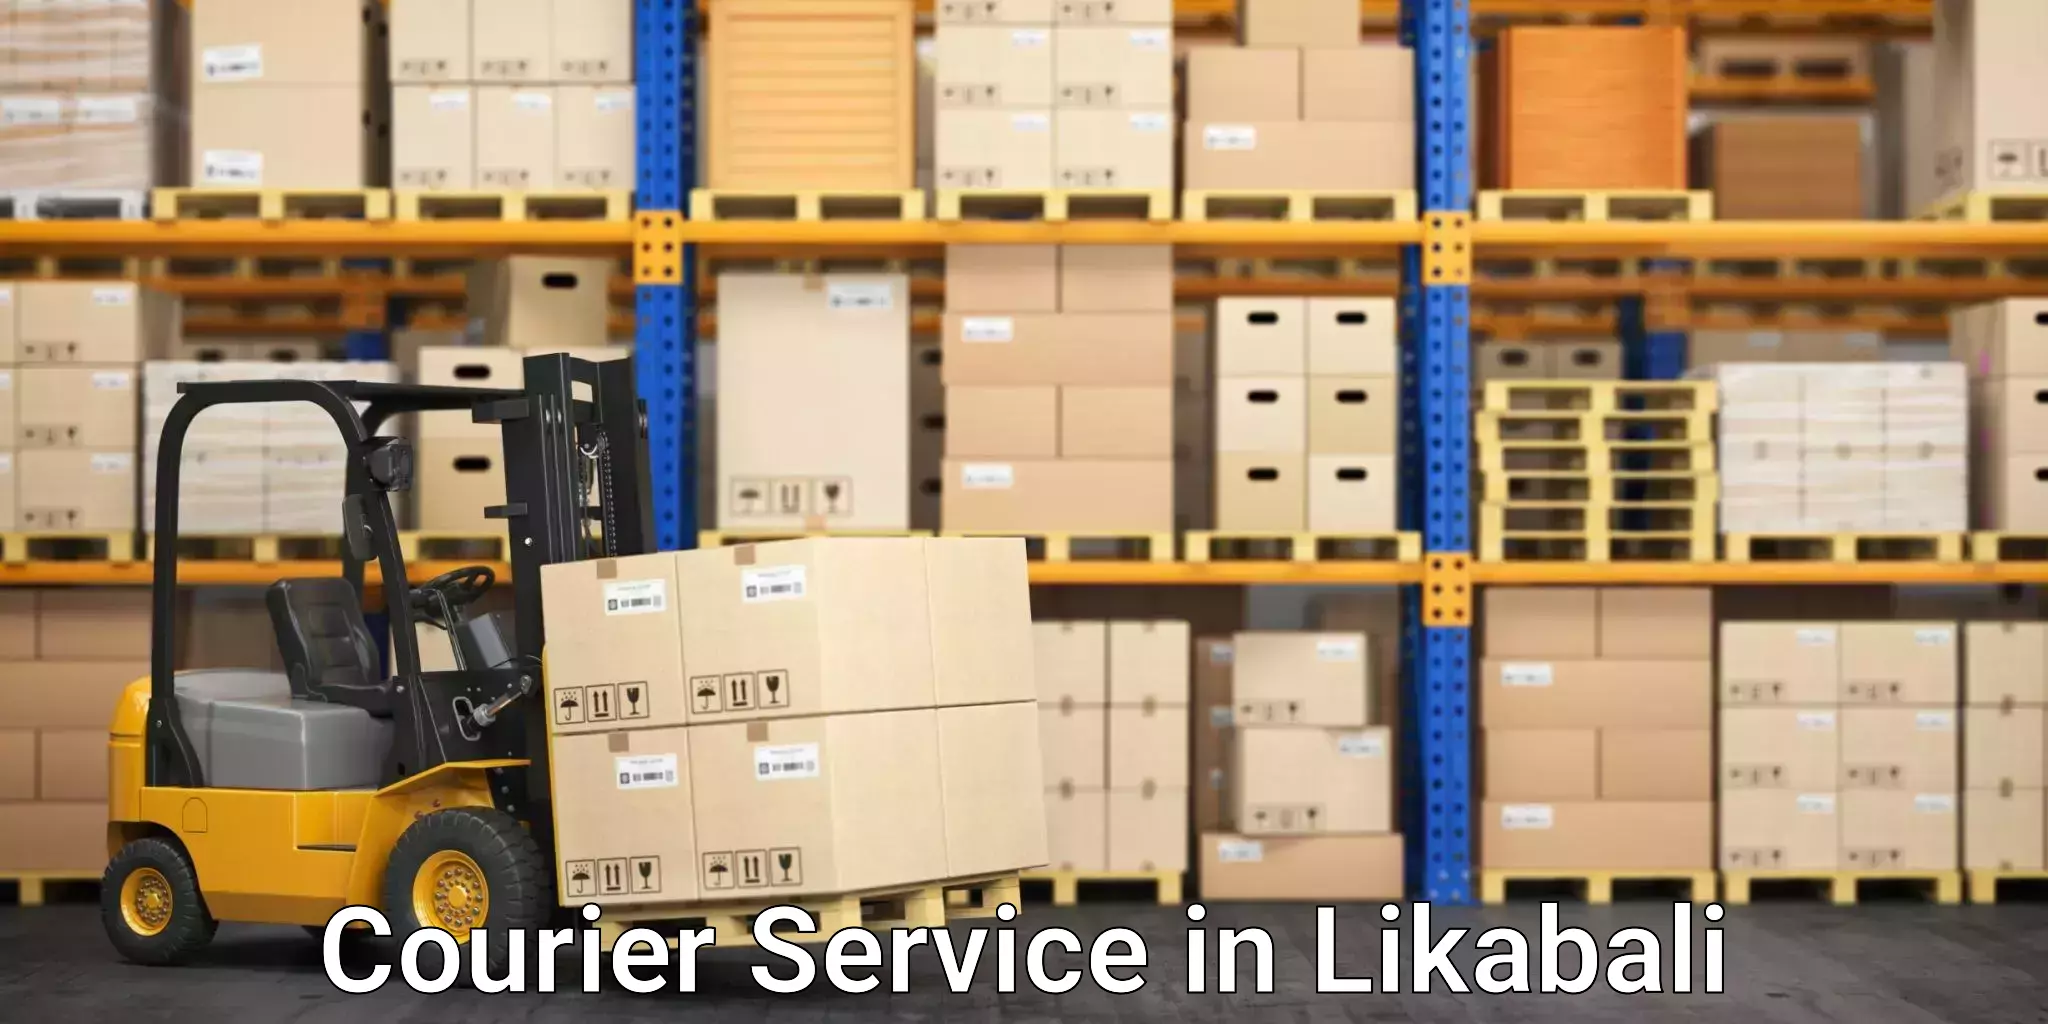 Efficient cargo services in Likabali